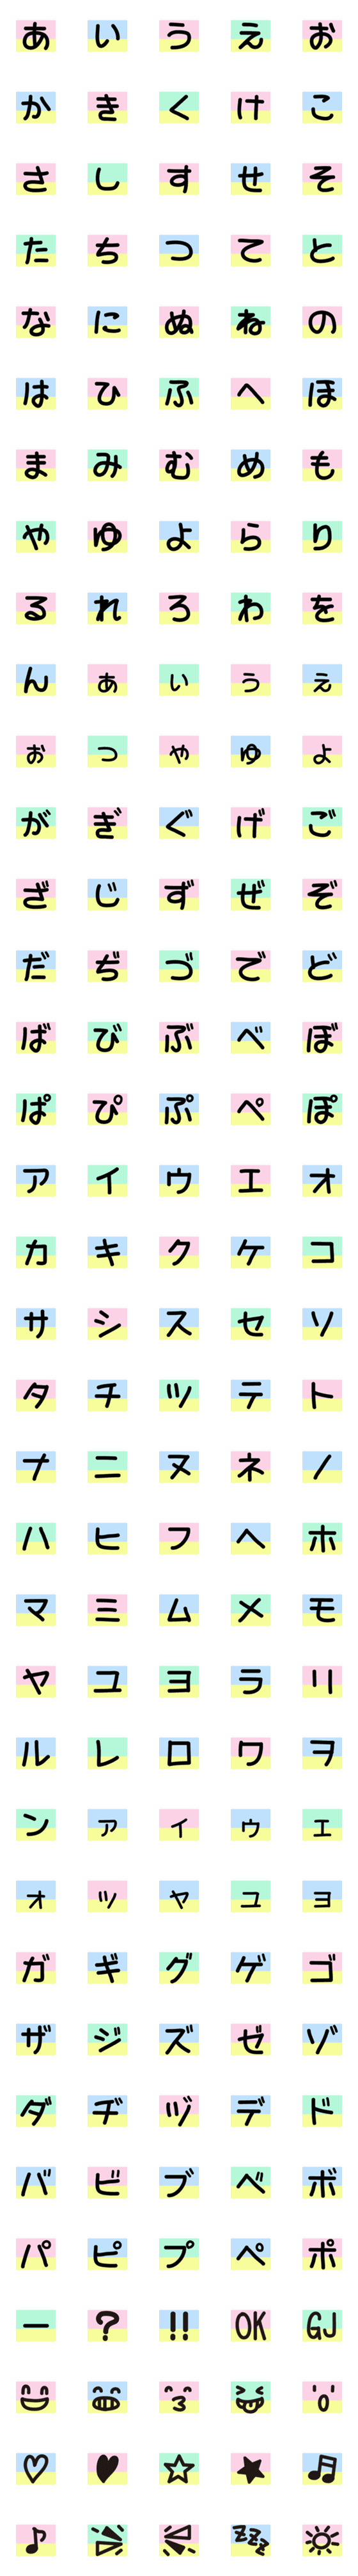 [LINE絵文字]パステルカラー蛍光ペンのデコ文字＆絵文字の画像一覧